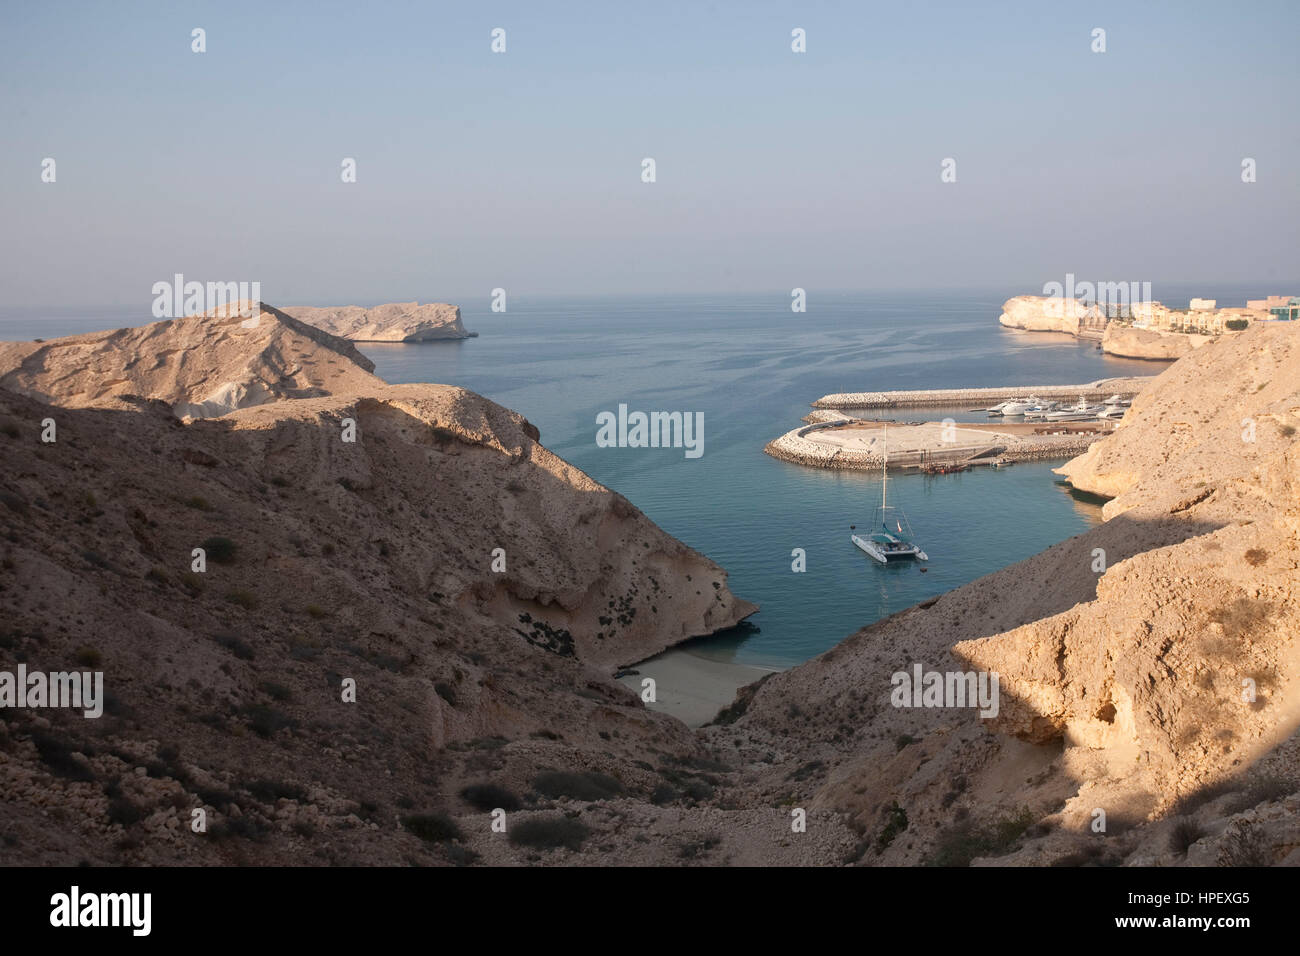 Bay at ODC, Muscat, Oman Stock Photo